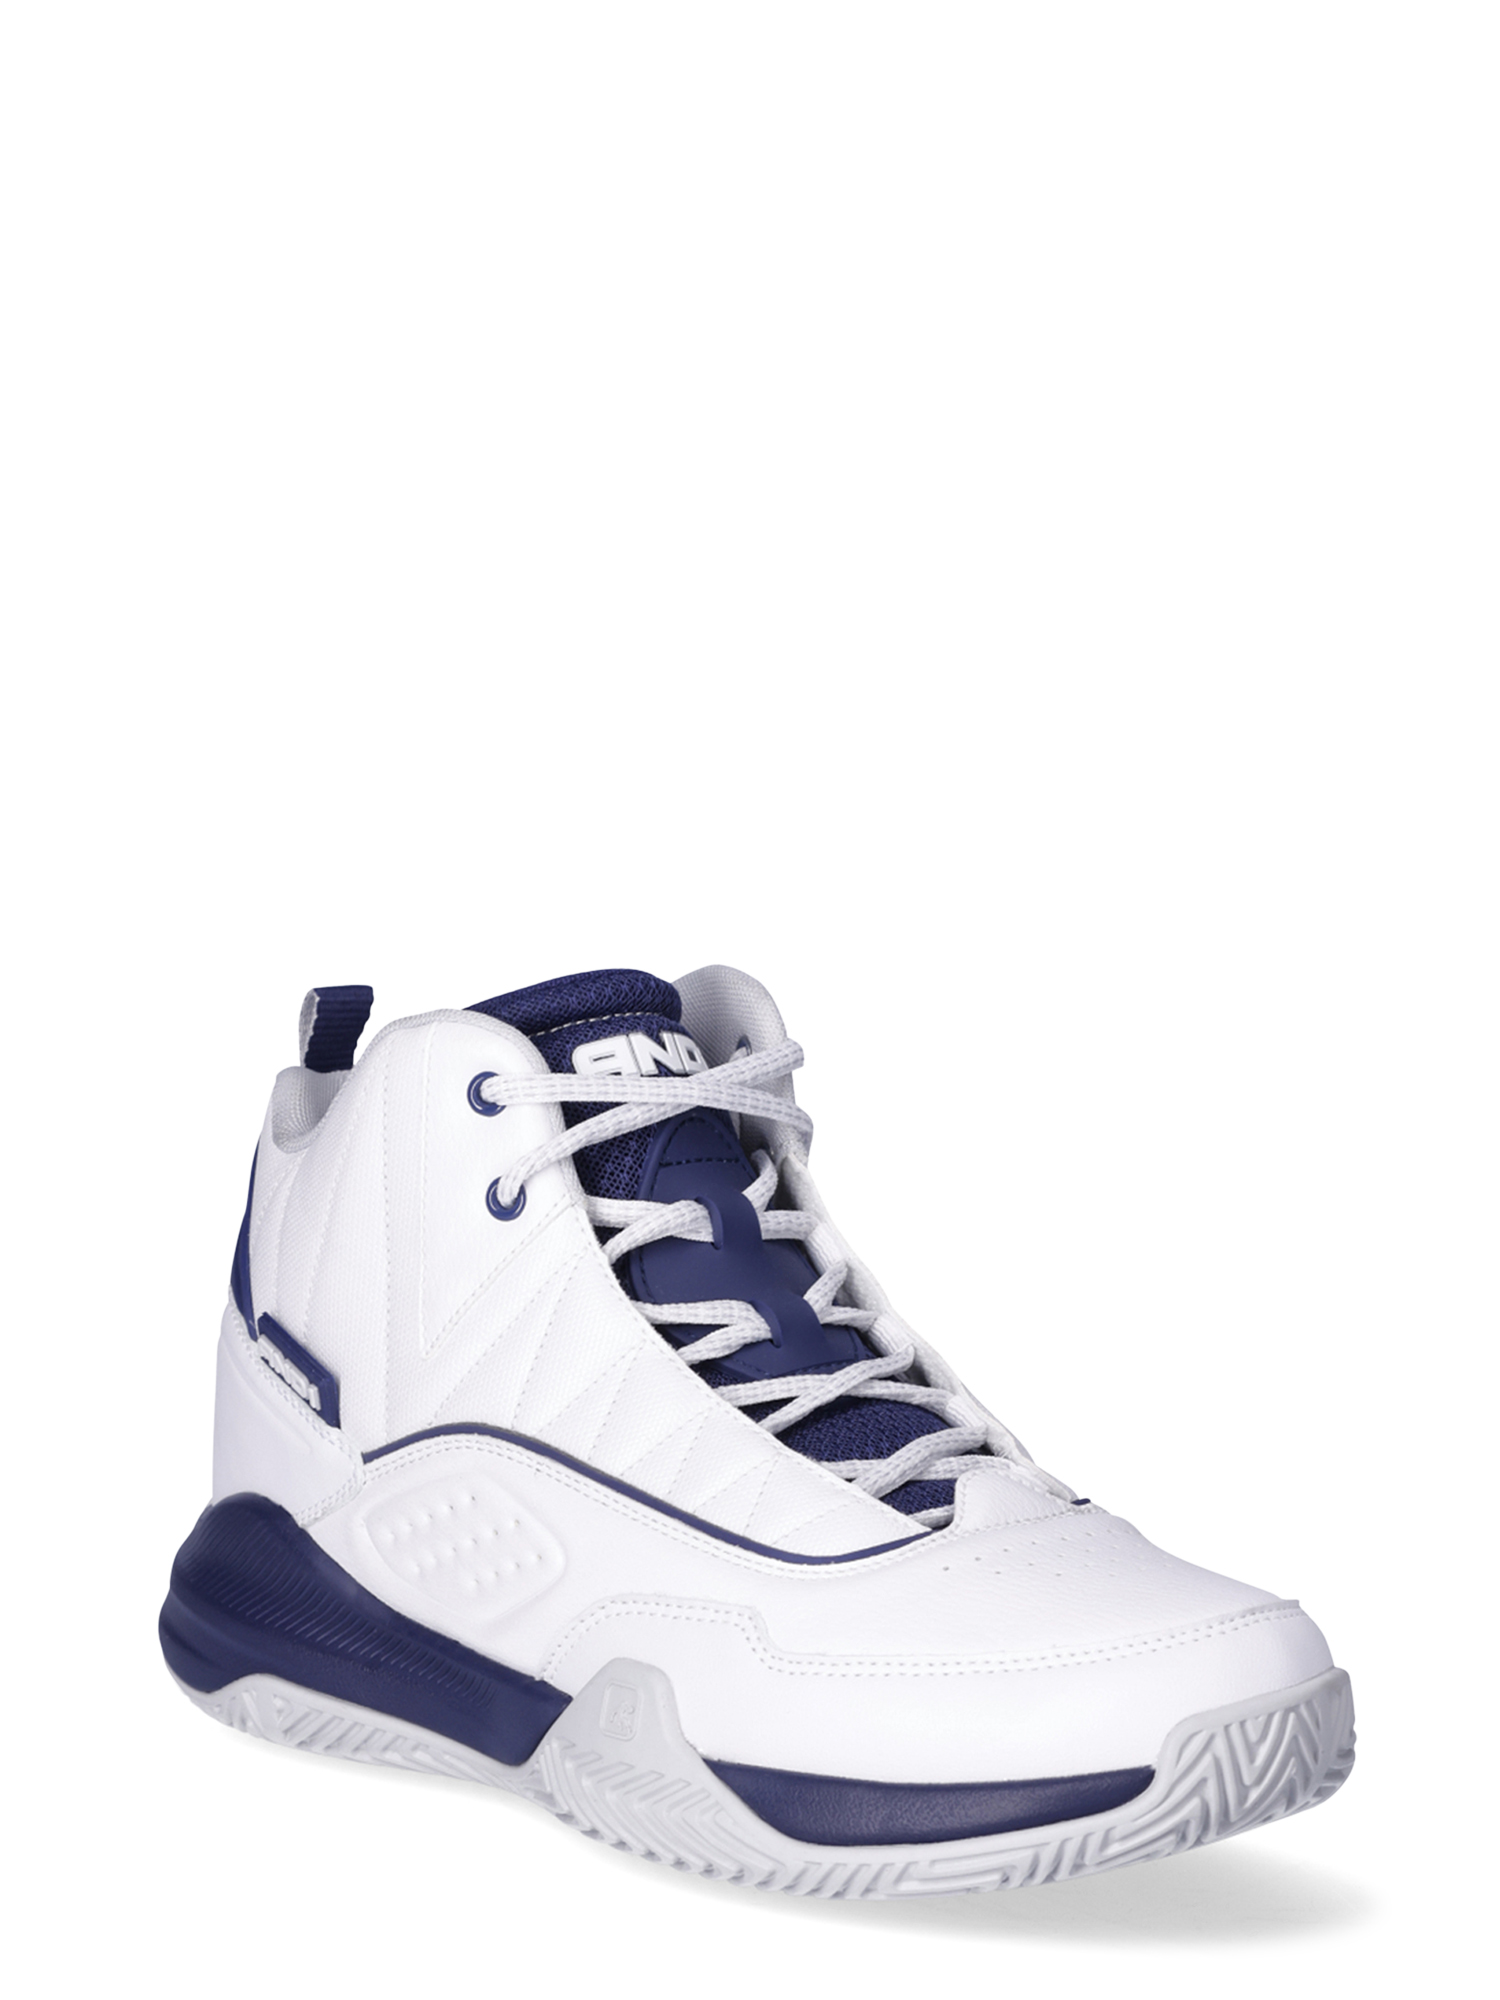 AND1 Men’s Streetball Basketball High-Top Sneakers - image 1 of 6